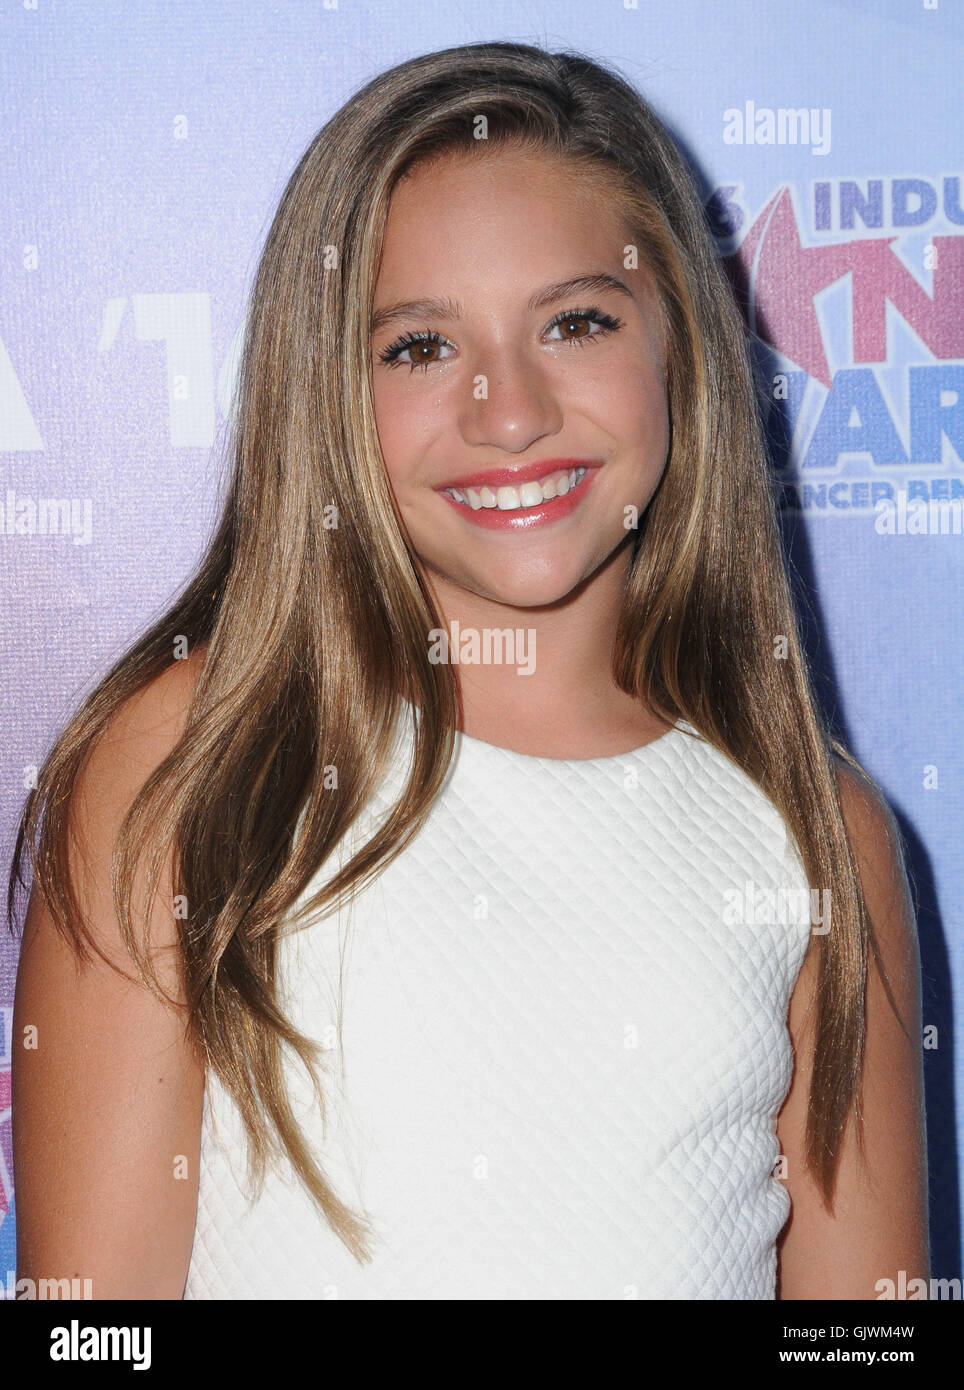 Hollywood, CA, USA. 17th Aug, 2016. 17 August 2016 - Hollywood, California. Mackenzie Ziegler. 2016 Industry Dance Awards & Cancer Benefit Show held at the Avalon. Photo Credit: Birdie Thompson/AdMedia Credit:  Birdie Thompson/AdMedia/ZUMA Wire/Alamy Live News Stock Photo